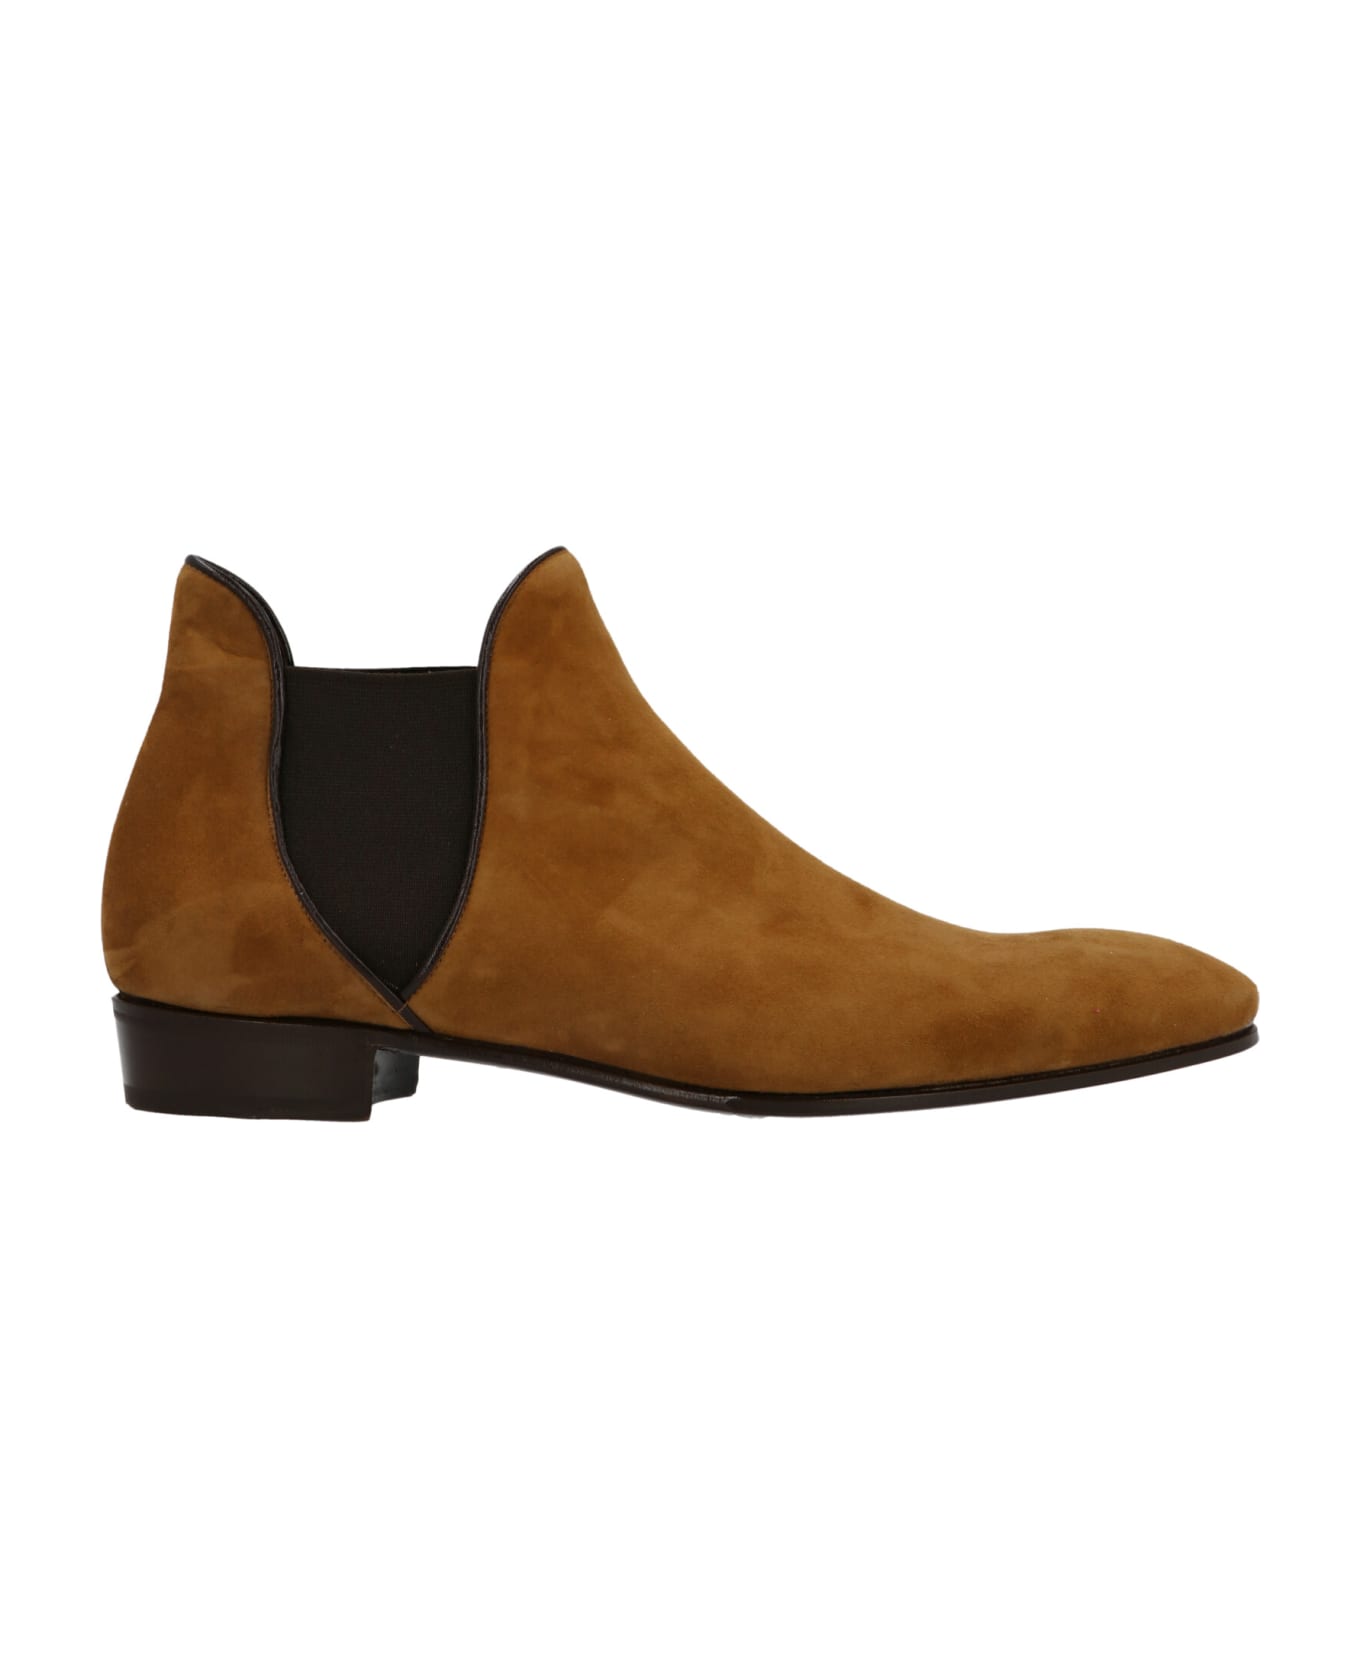 Lidfort Suede Ankle Boots - Brown